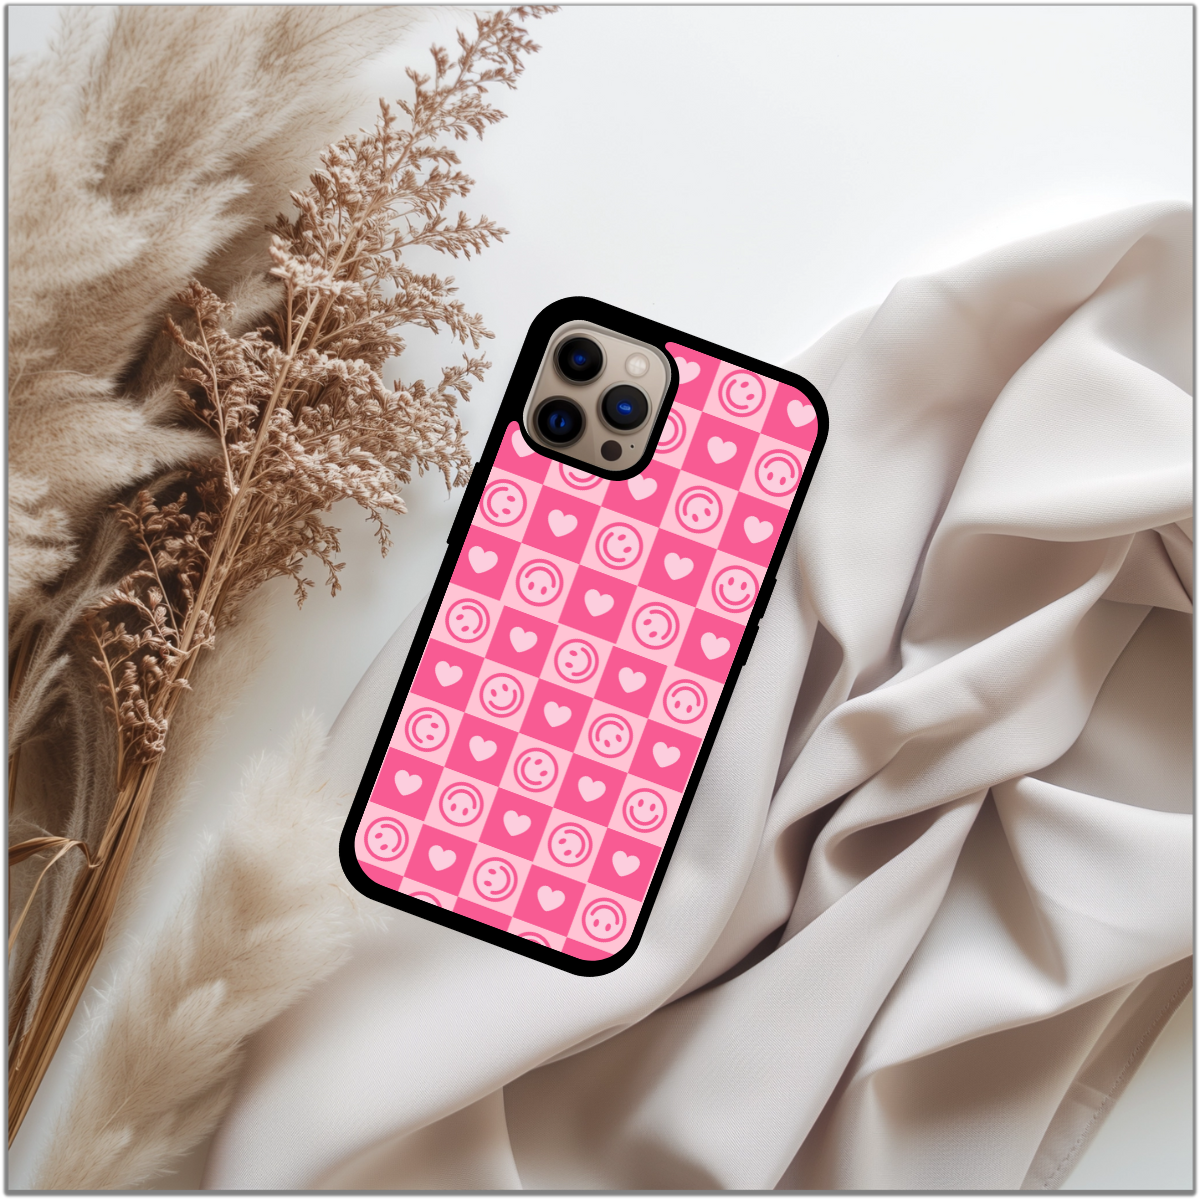 Stylish phone case |  Pink Phone case gift for her - Emoji  iPhone Case - heart phone case - Trendy Phone Accessory - Girly - Gifts for teens